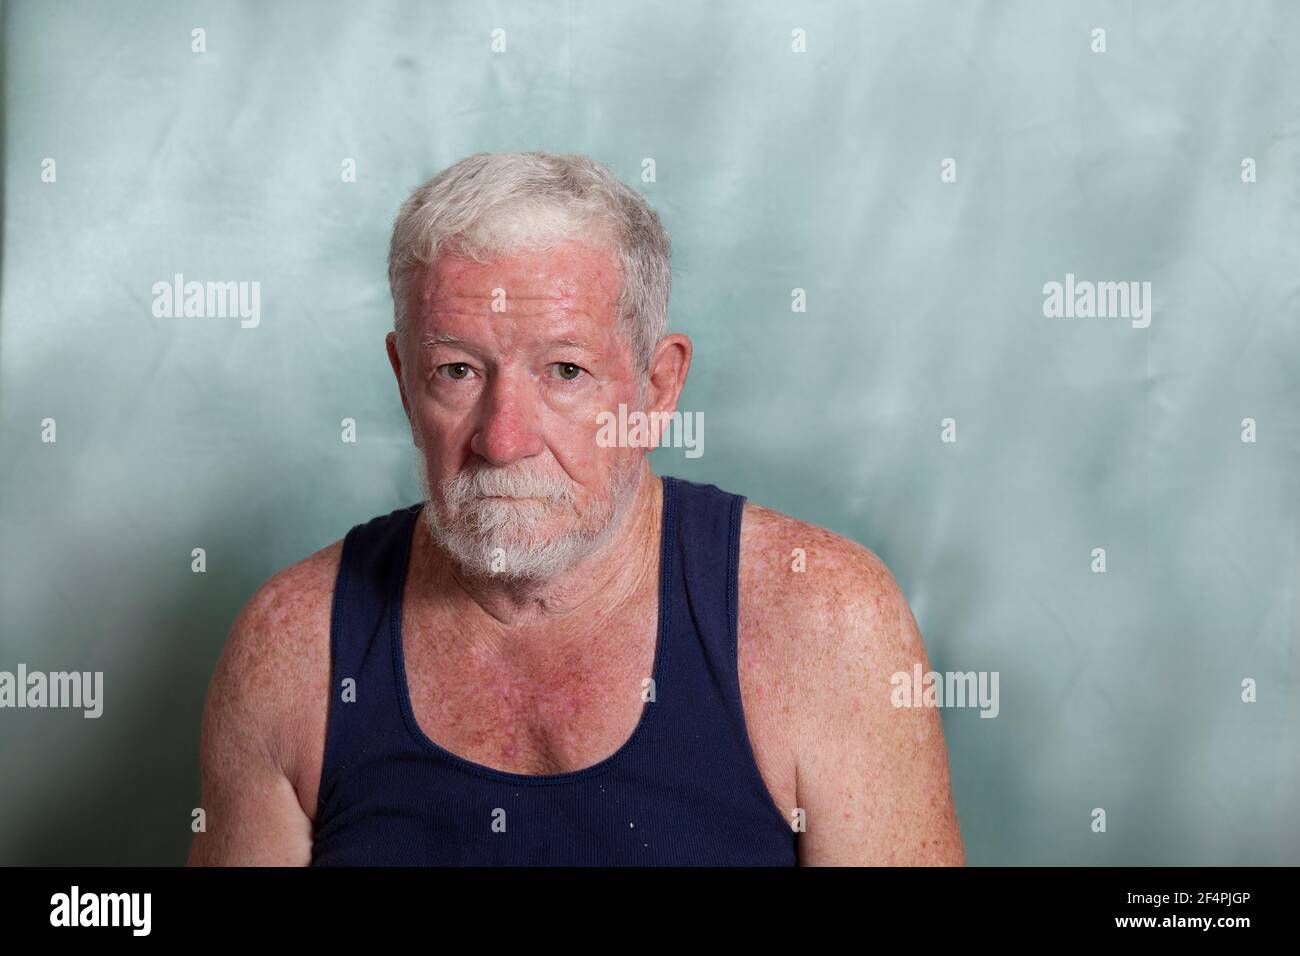 An old caucasian man dressed in a blue singlet, with a lot of sun damage and skin cancers and  a grumpy angry expression on his face. Stock Photo